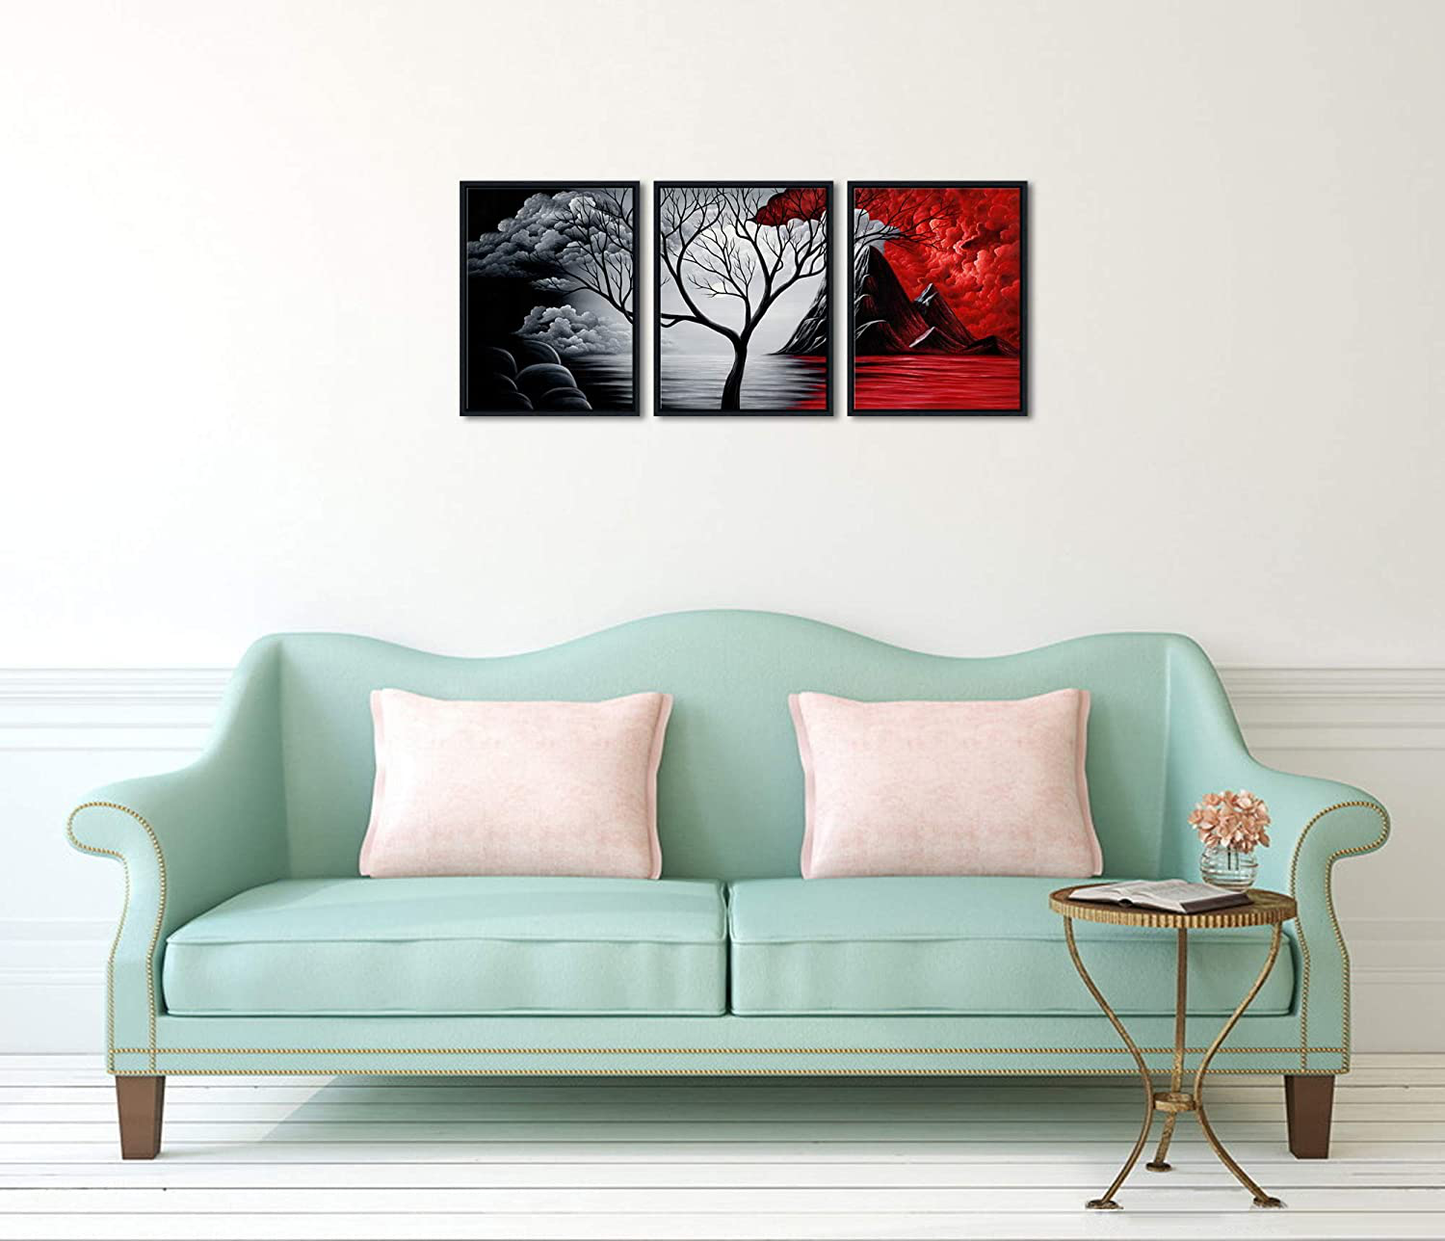 Wieco Art Large Canvas Art Prints Wall Art The Cloud Tree Abstract Pictures Paintings for Bedroom Home Office Decorations 3 Piece Modern Stretched and Framed Contemporary Landscape Giclee Artwork